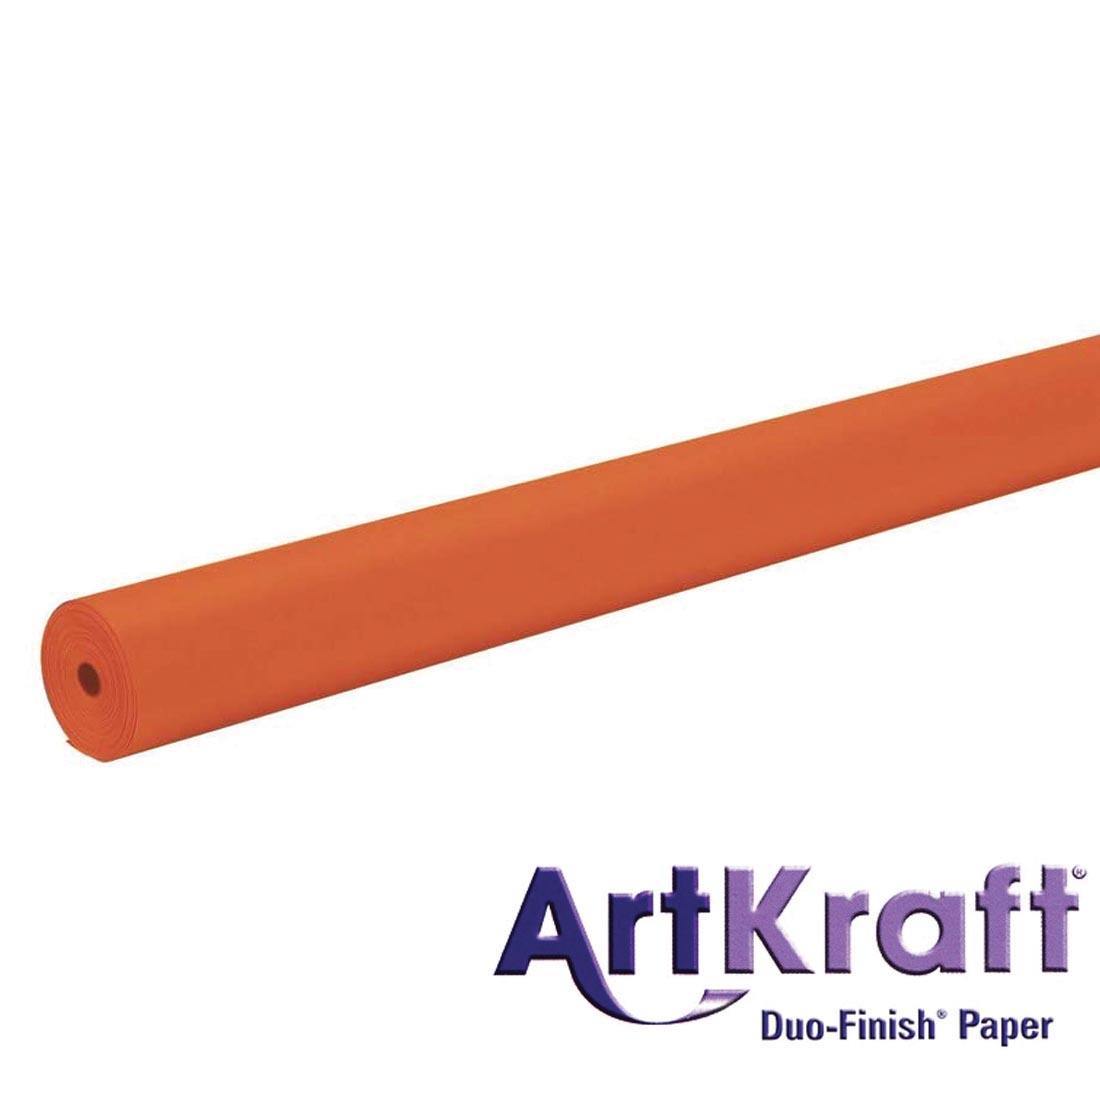 Roll of Orange Paper with text ArtKraft Duo-Finish Paper